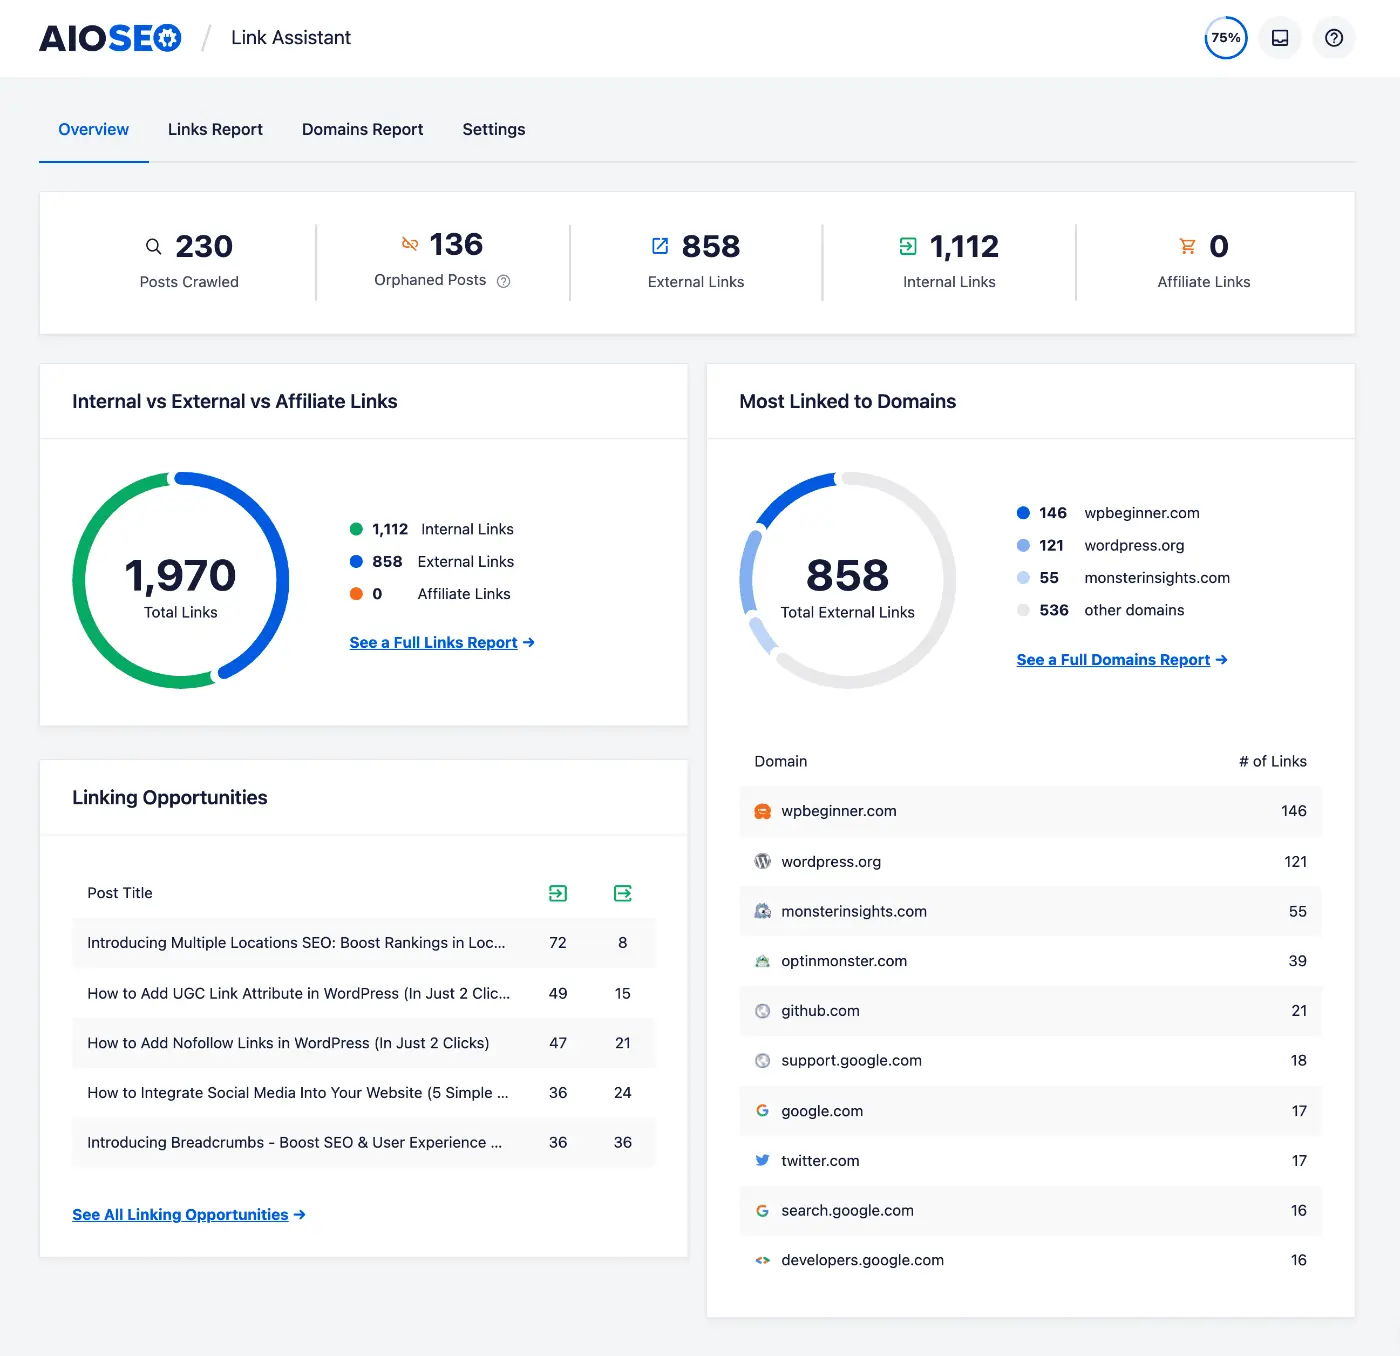 AIOSEO-Link-Assistant